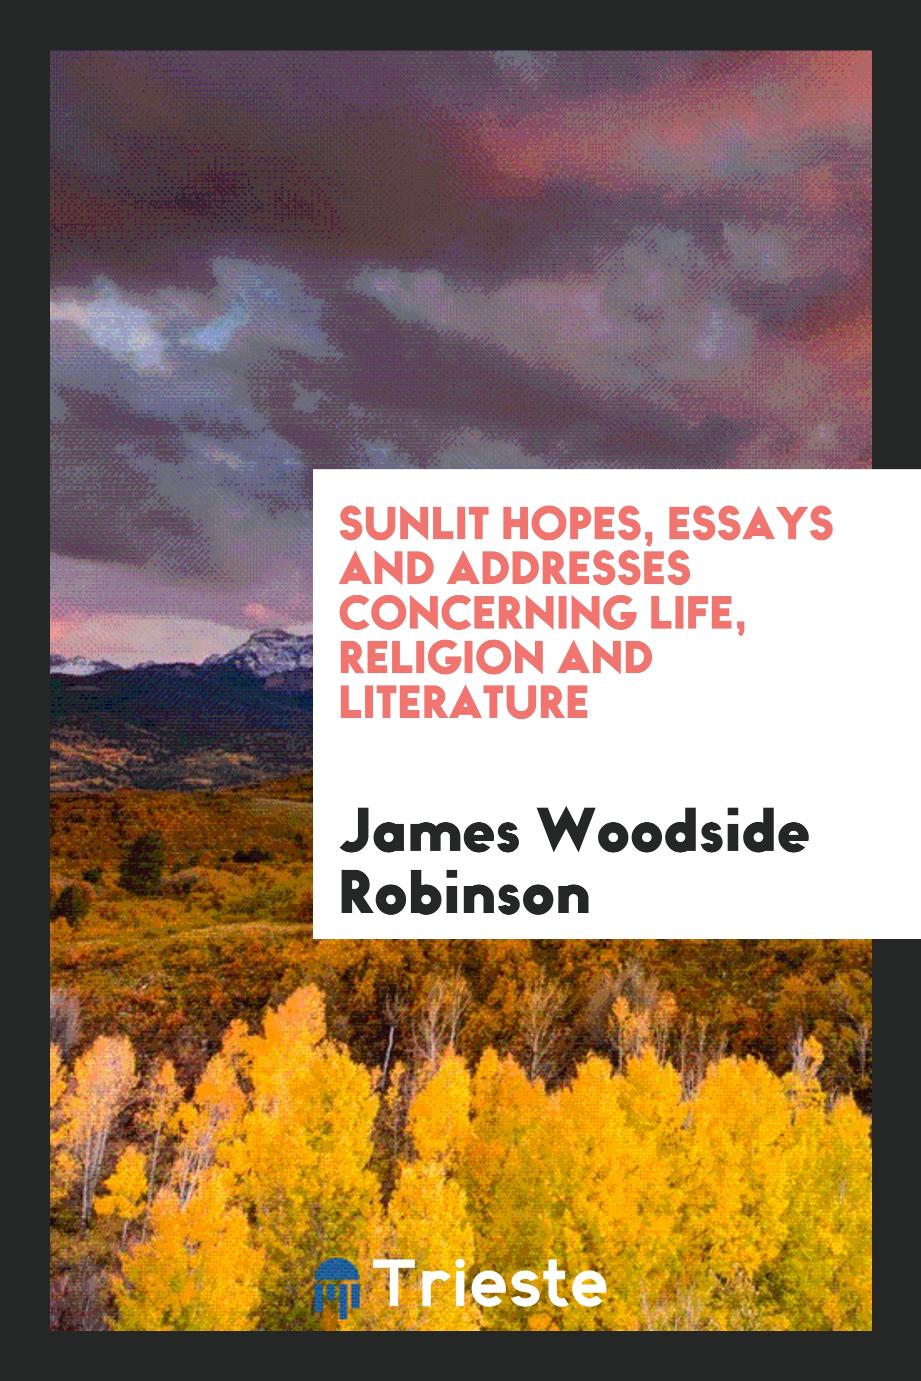 Sunlit hopes, essays and addresses concerning life, religion and literature